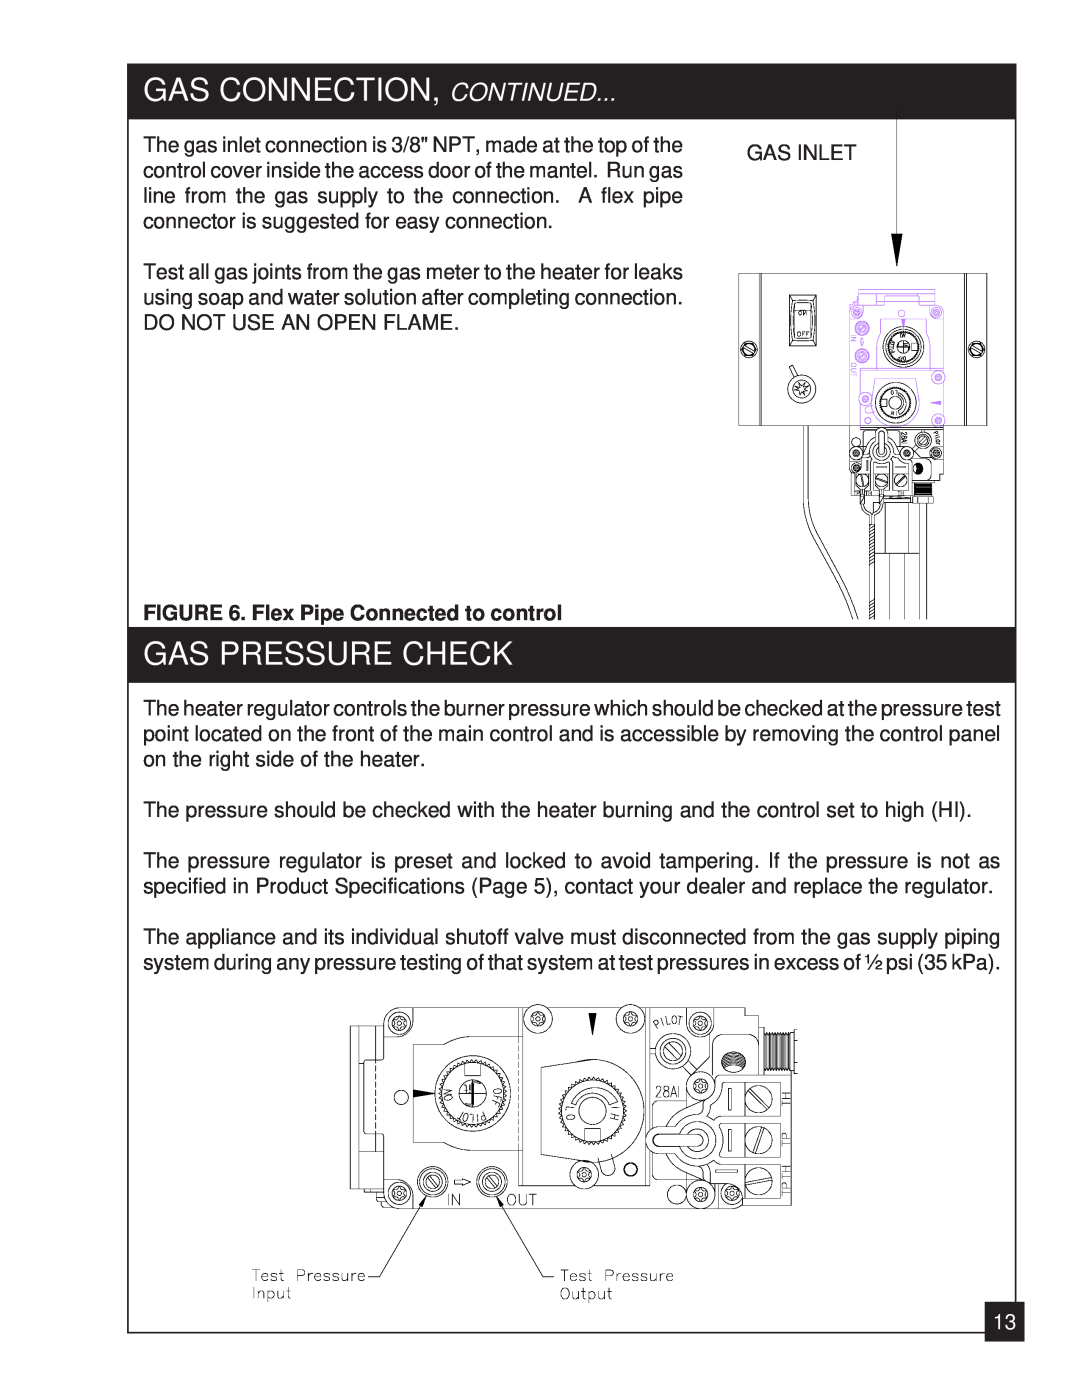 United States Stove 2020L installation manual Gas Connection, Continued, Gas Pressure Check, Flex Pipe Connected to control 